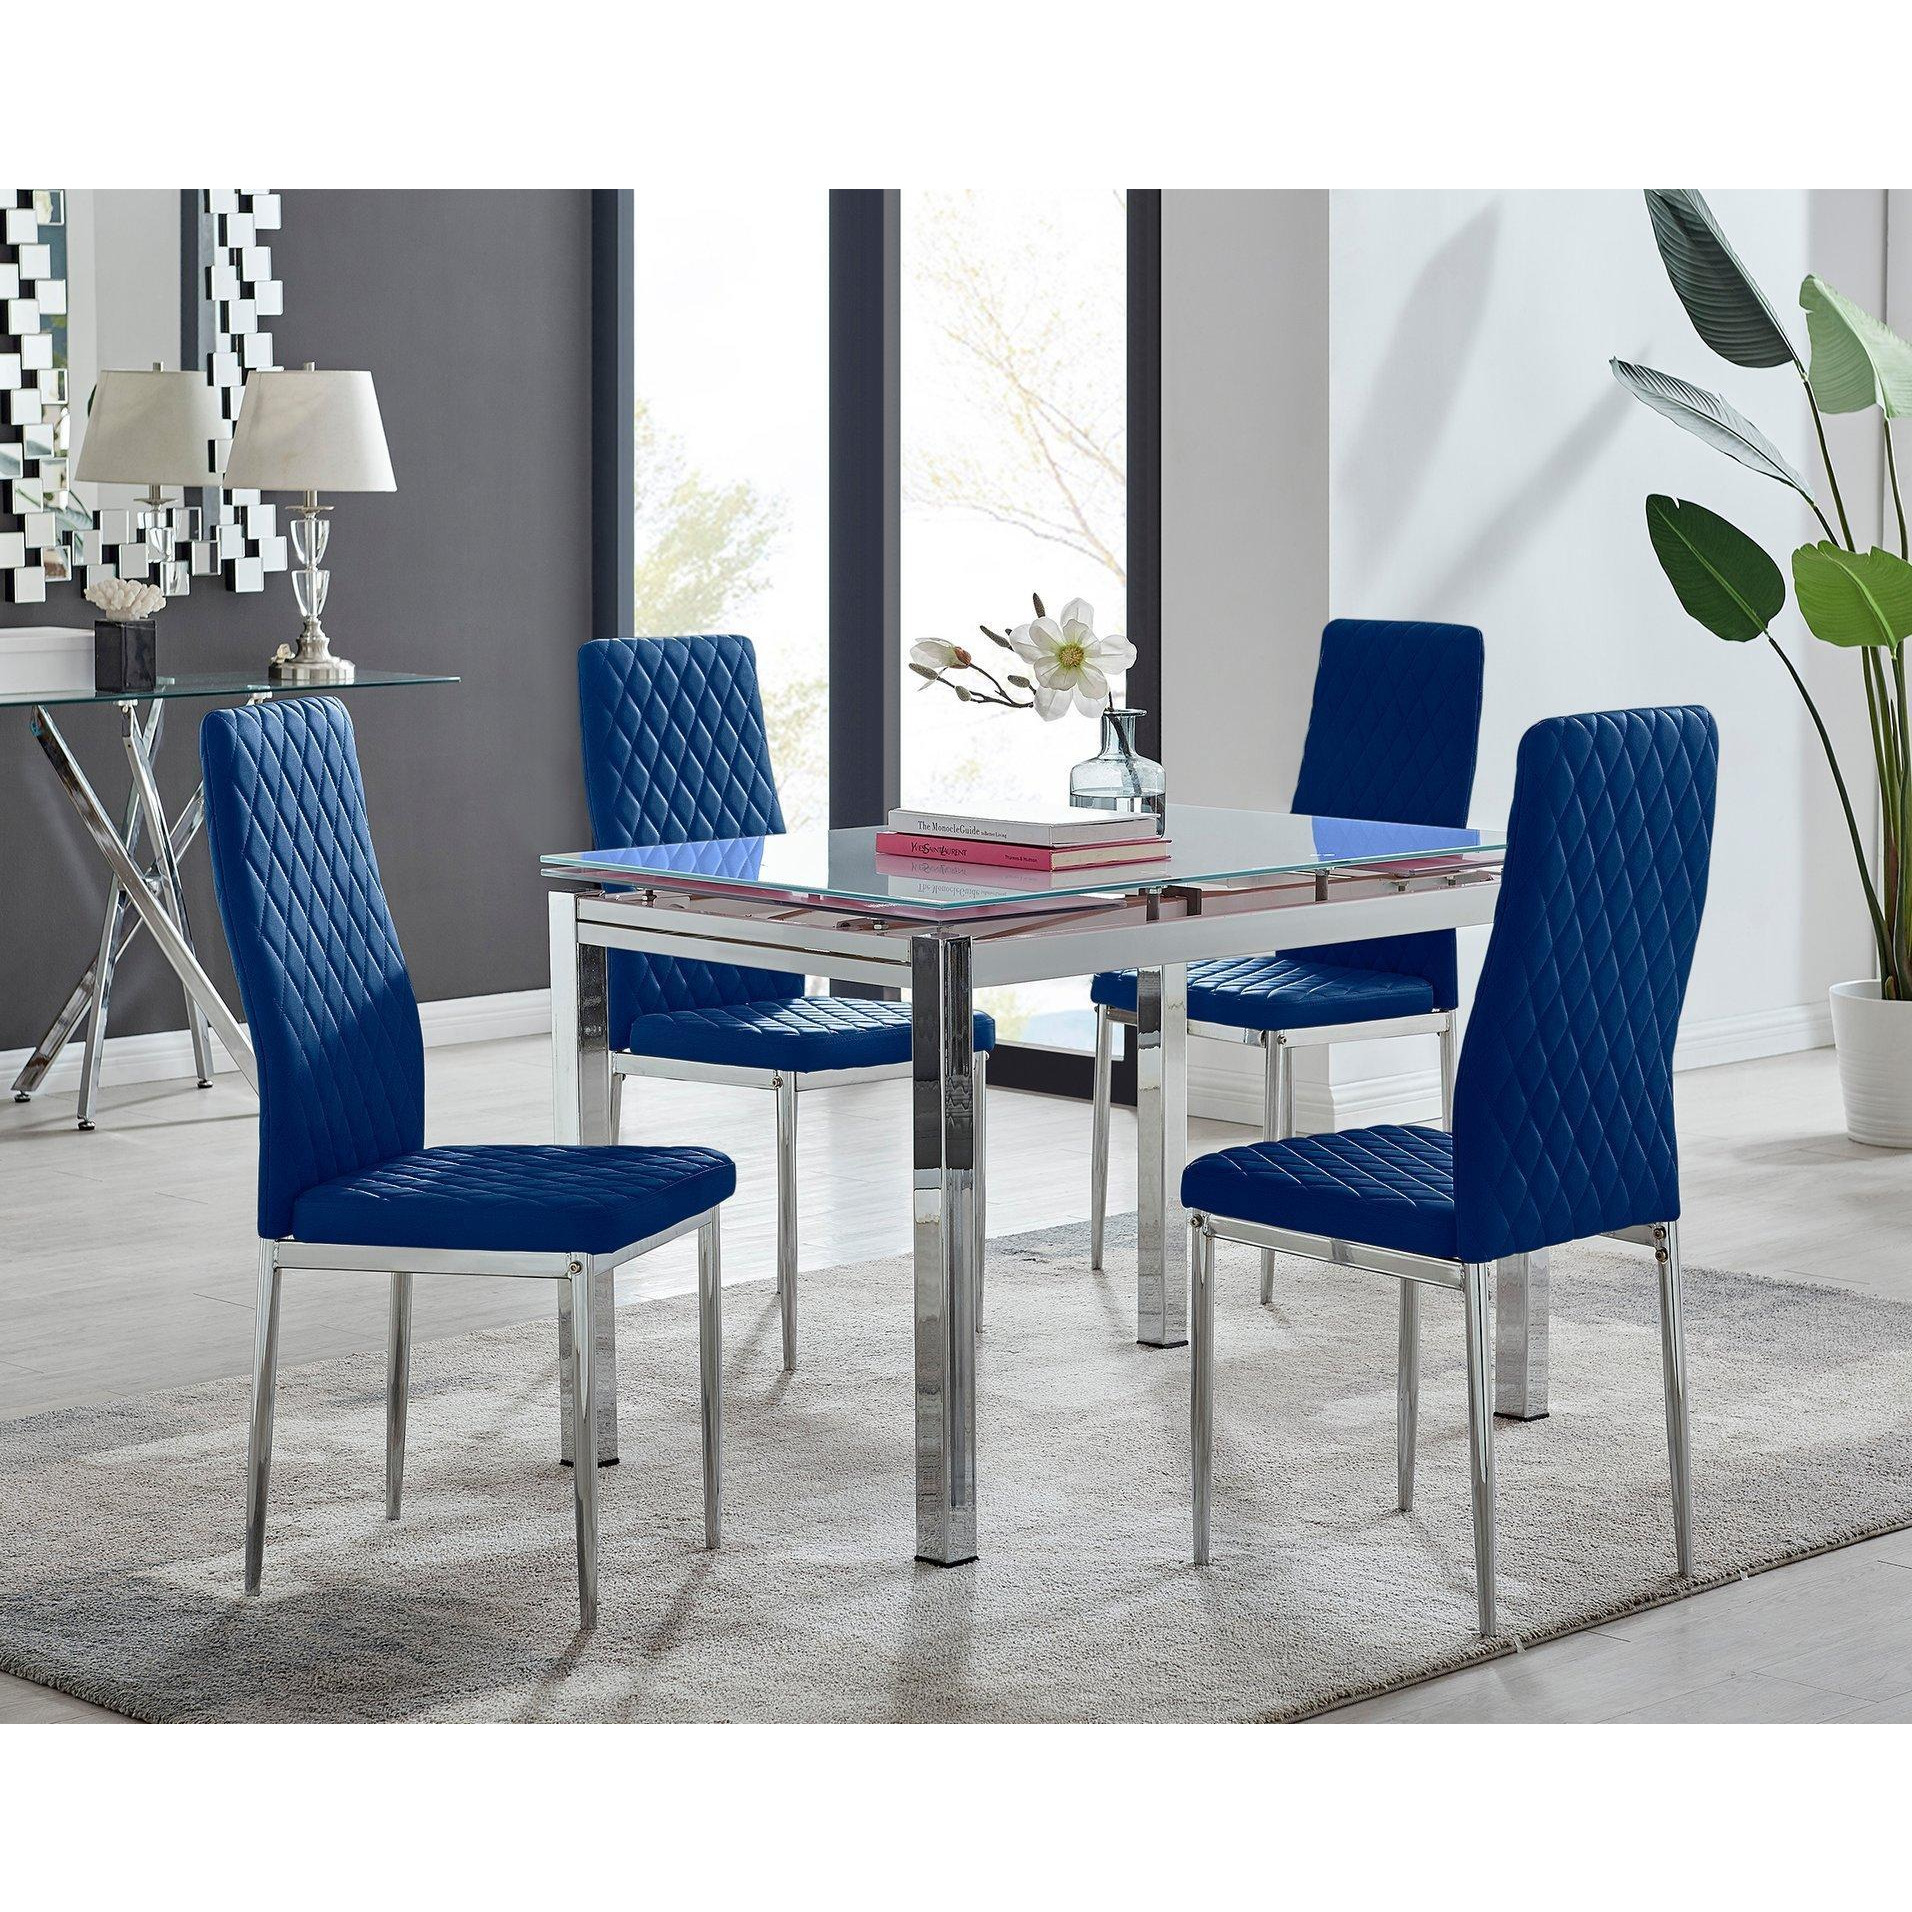 Enna White Glass Extending 4-6 Seater Dining Table and 4 Milan Soft Velvet Chairs - image 1